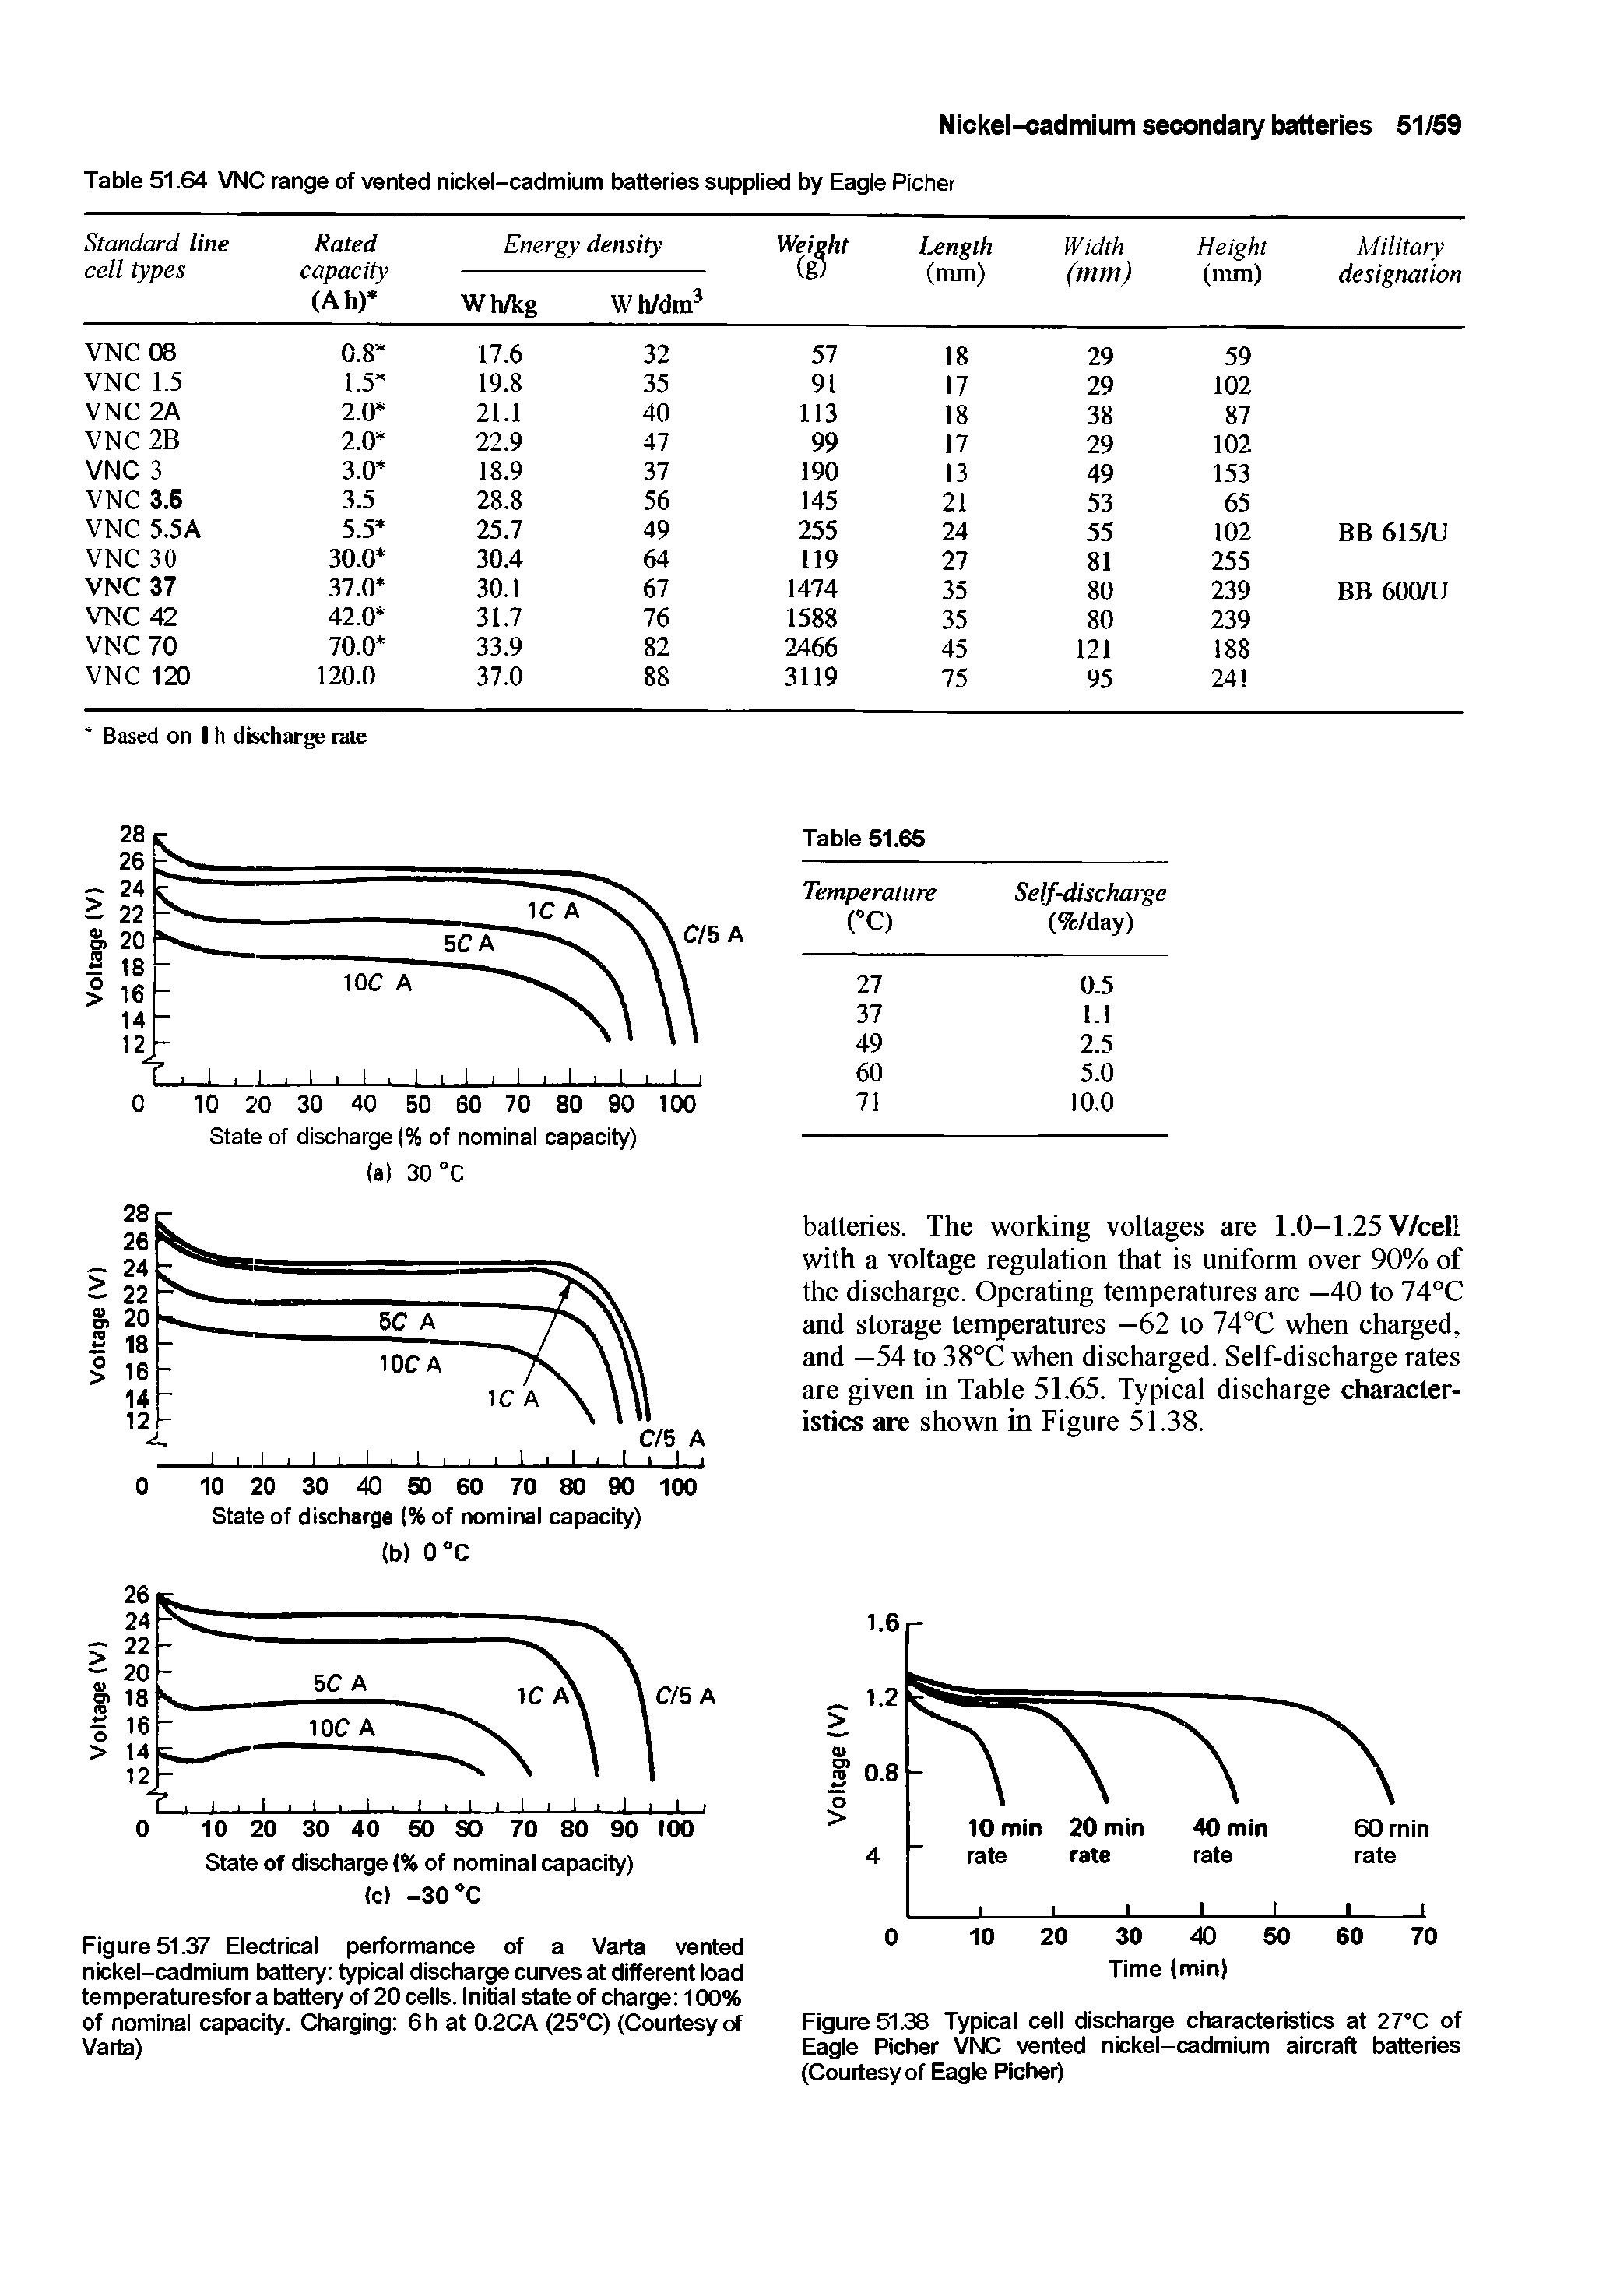 Figure 51.38 Typical cell discharge characteristics at 2VC of Eagle Richer VNC vented nickel-cadmium aircraft batteries (Courtesy of Eagle Richer)...